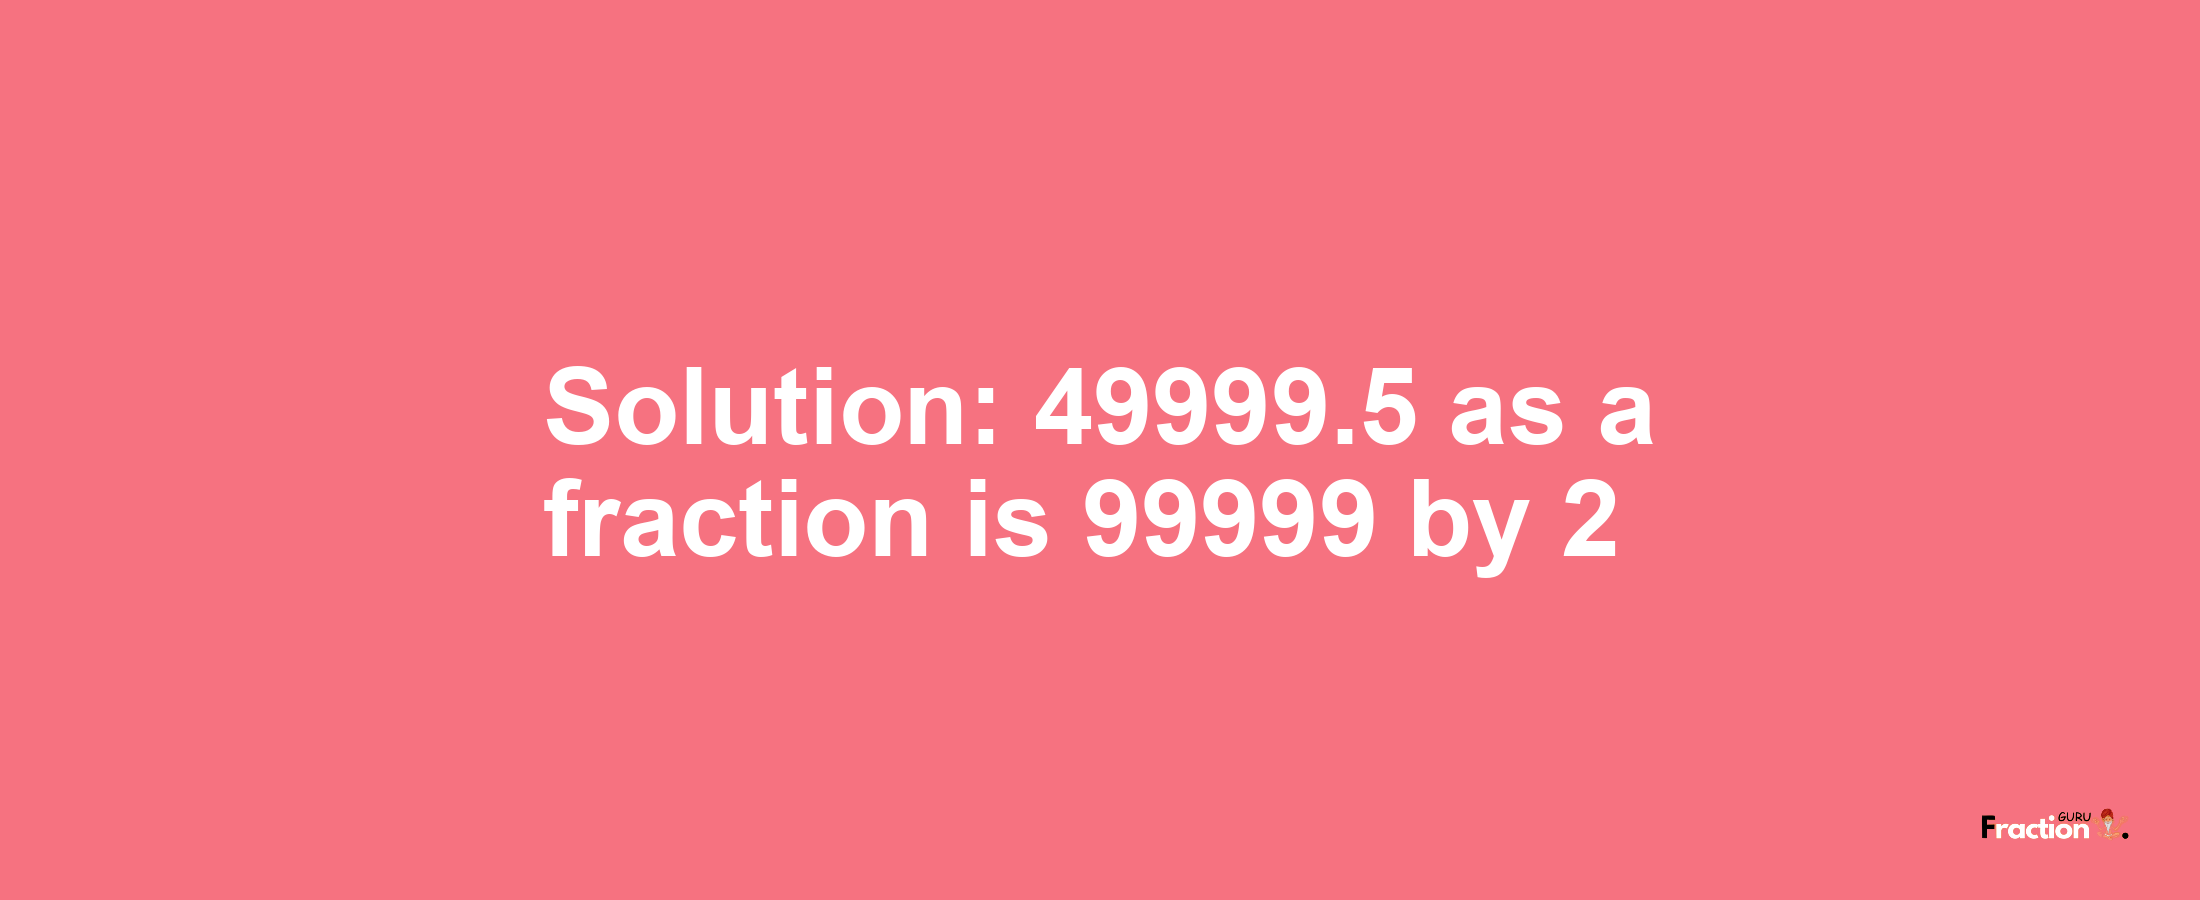 Solution:49999.5 as a fraction is 99999/2